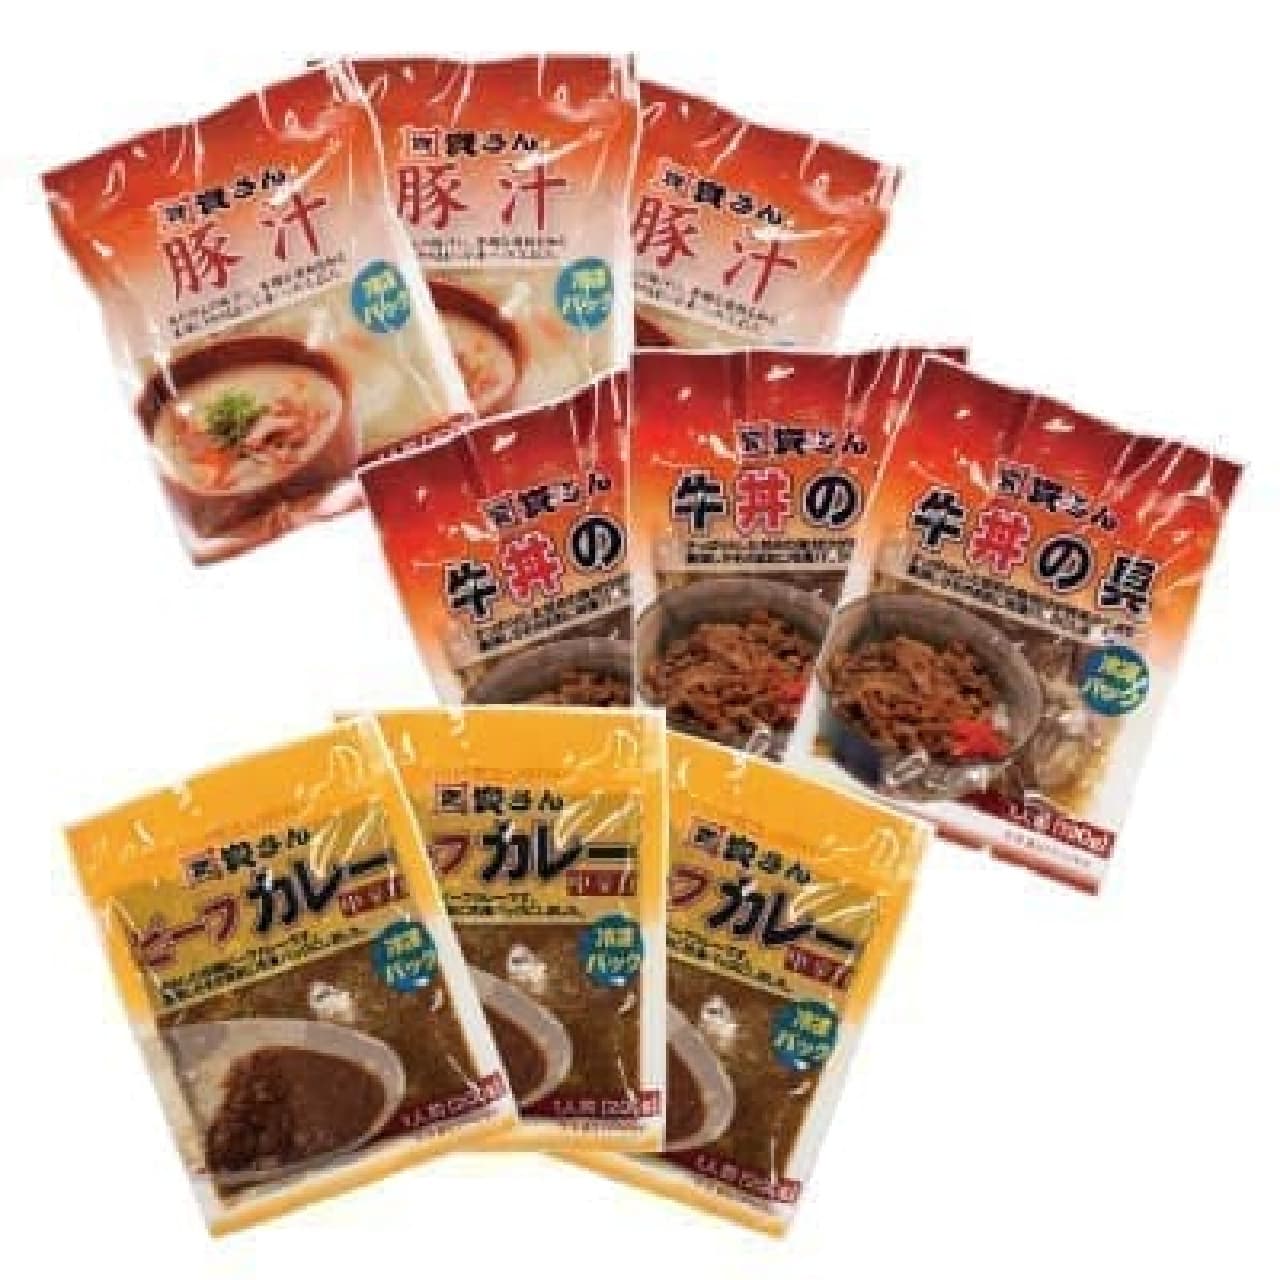 Sukesan Udon mail order products